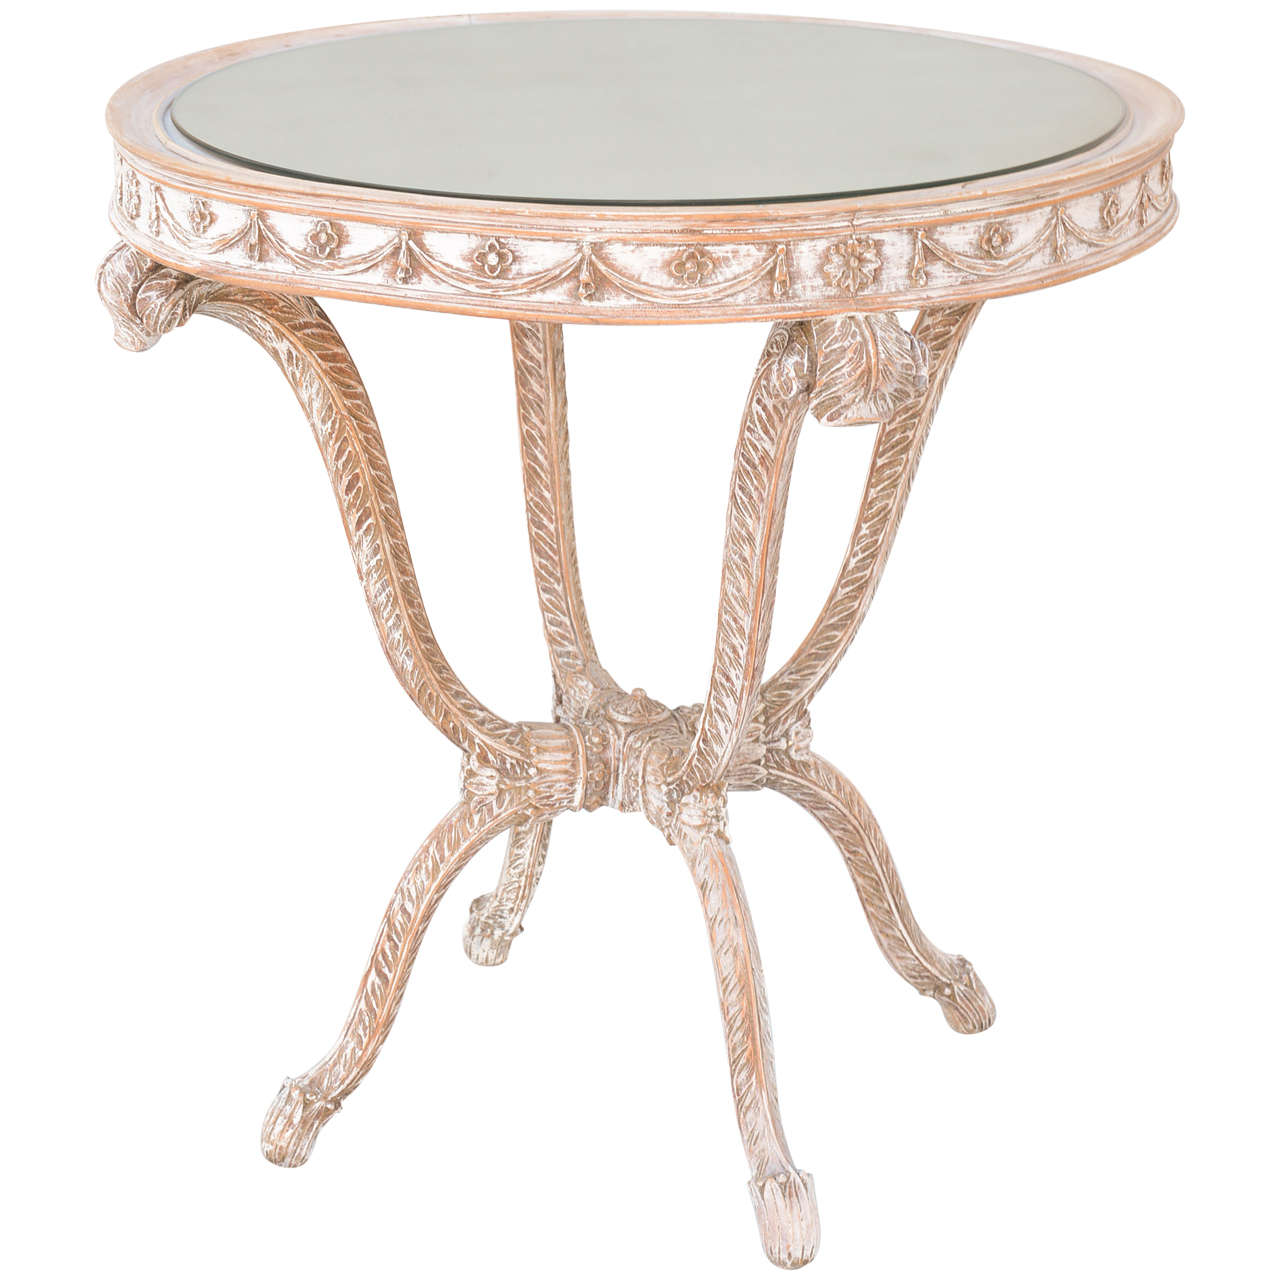 Italian Occasional Table with Mirrored Top on Carved Wood "Plume" Base For Sale